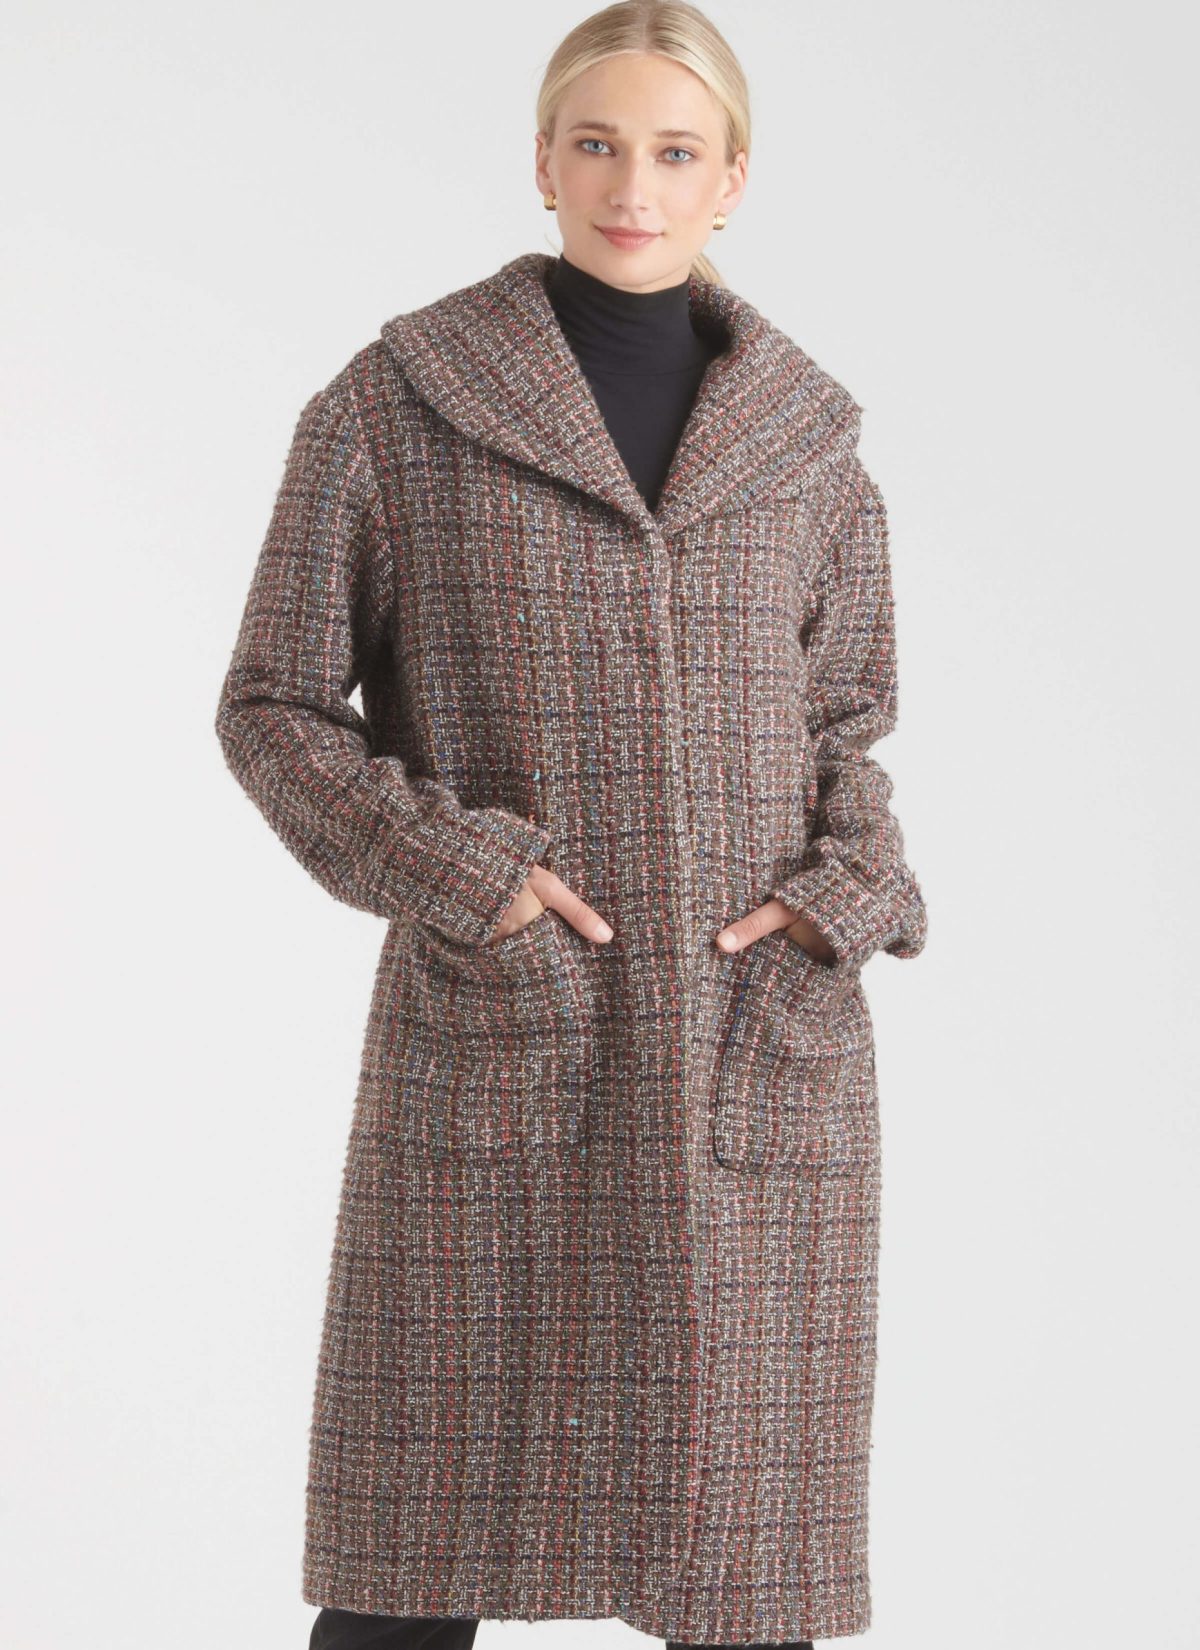 New Look Sewing Pattern N6767 Misses' Coats